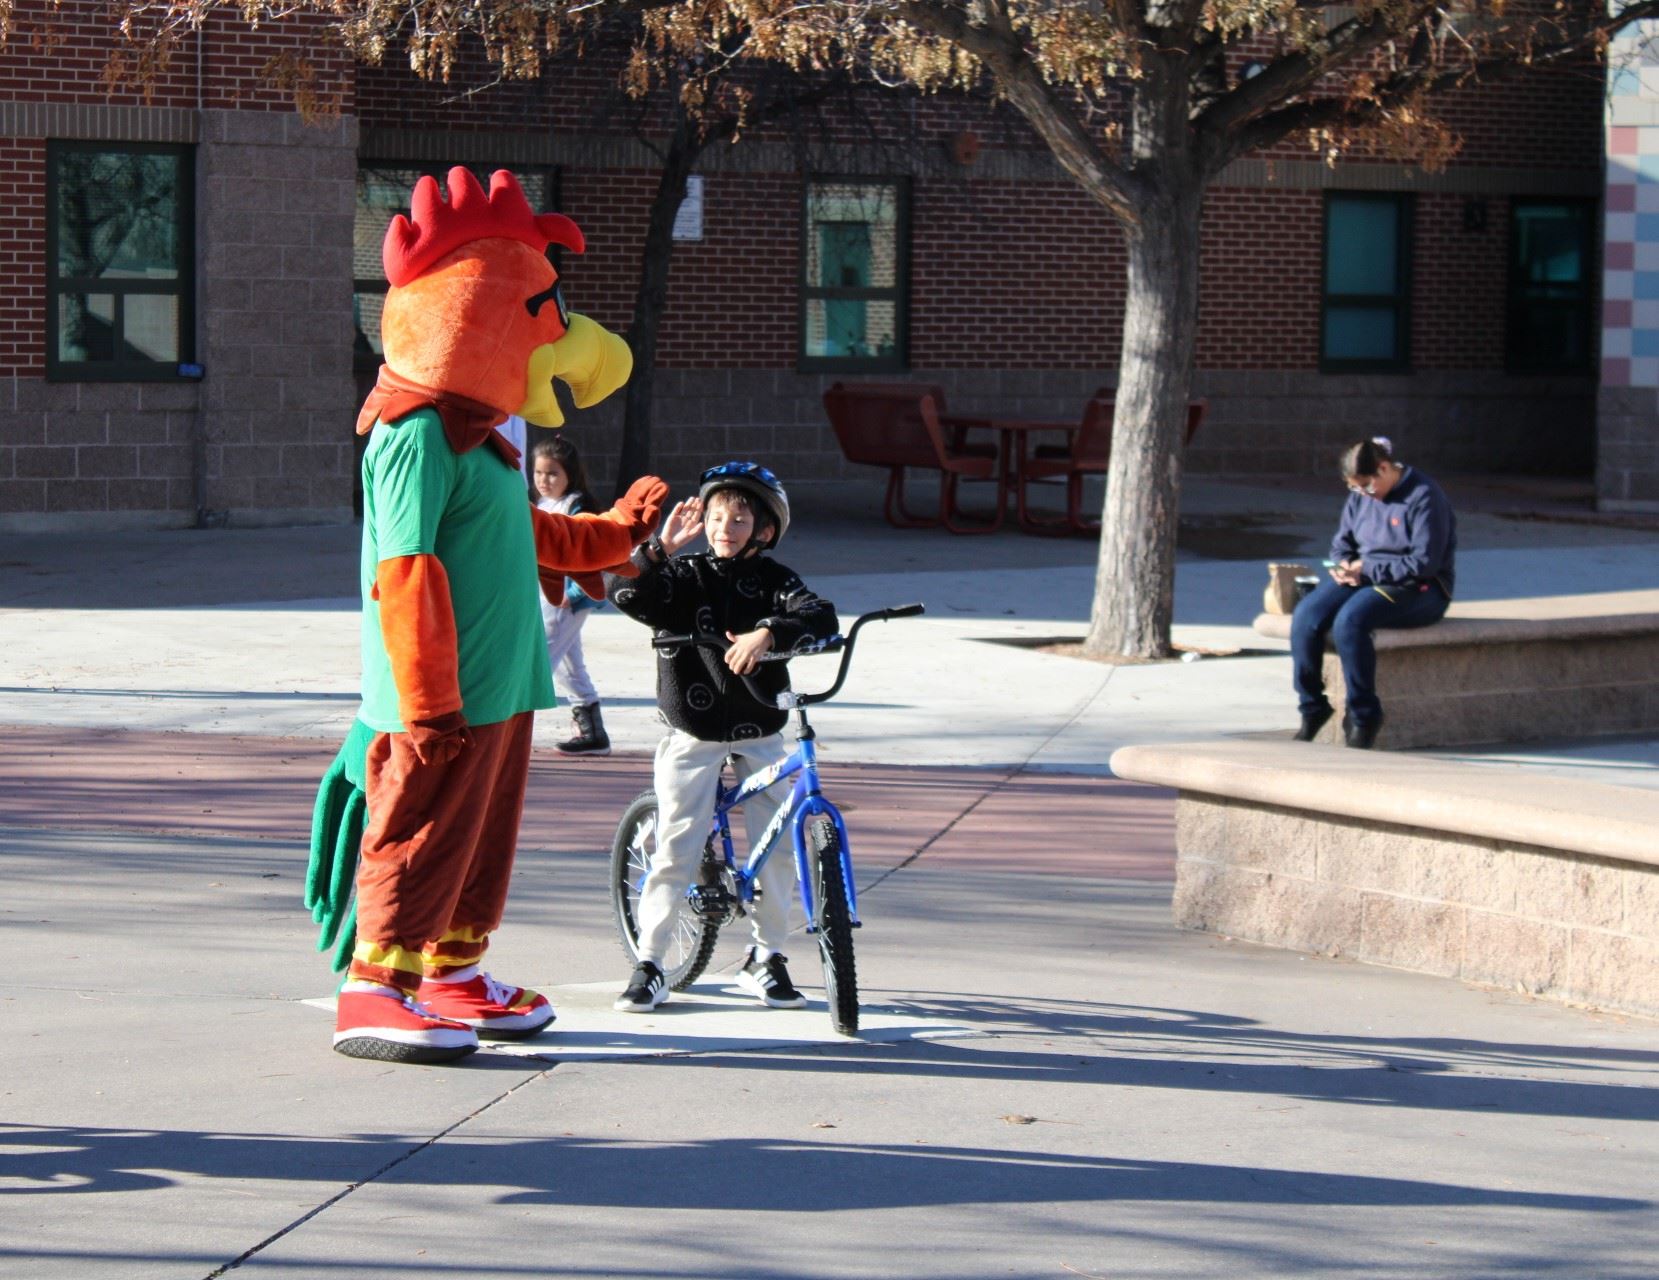 Wheat Ridge Parks and Recreation Booster the Rooster high fiving a child on a bike